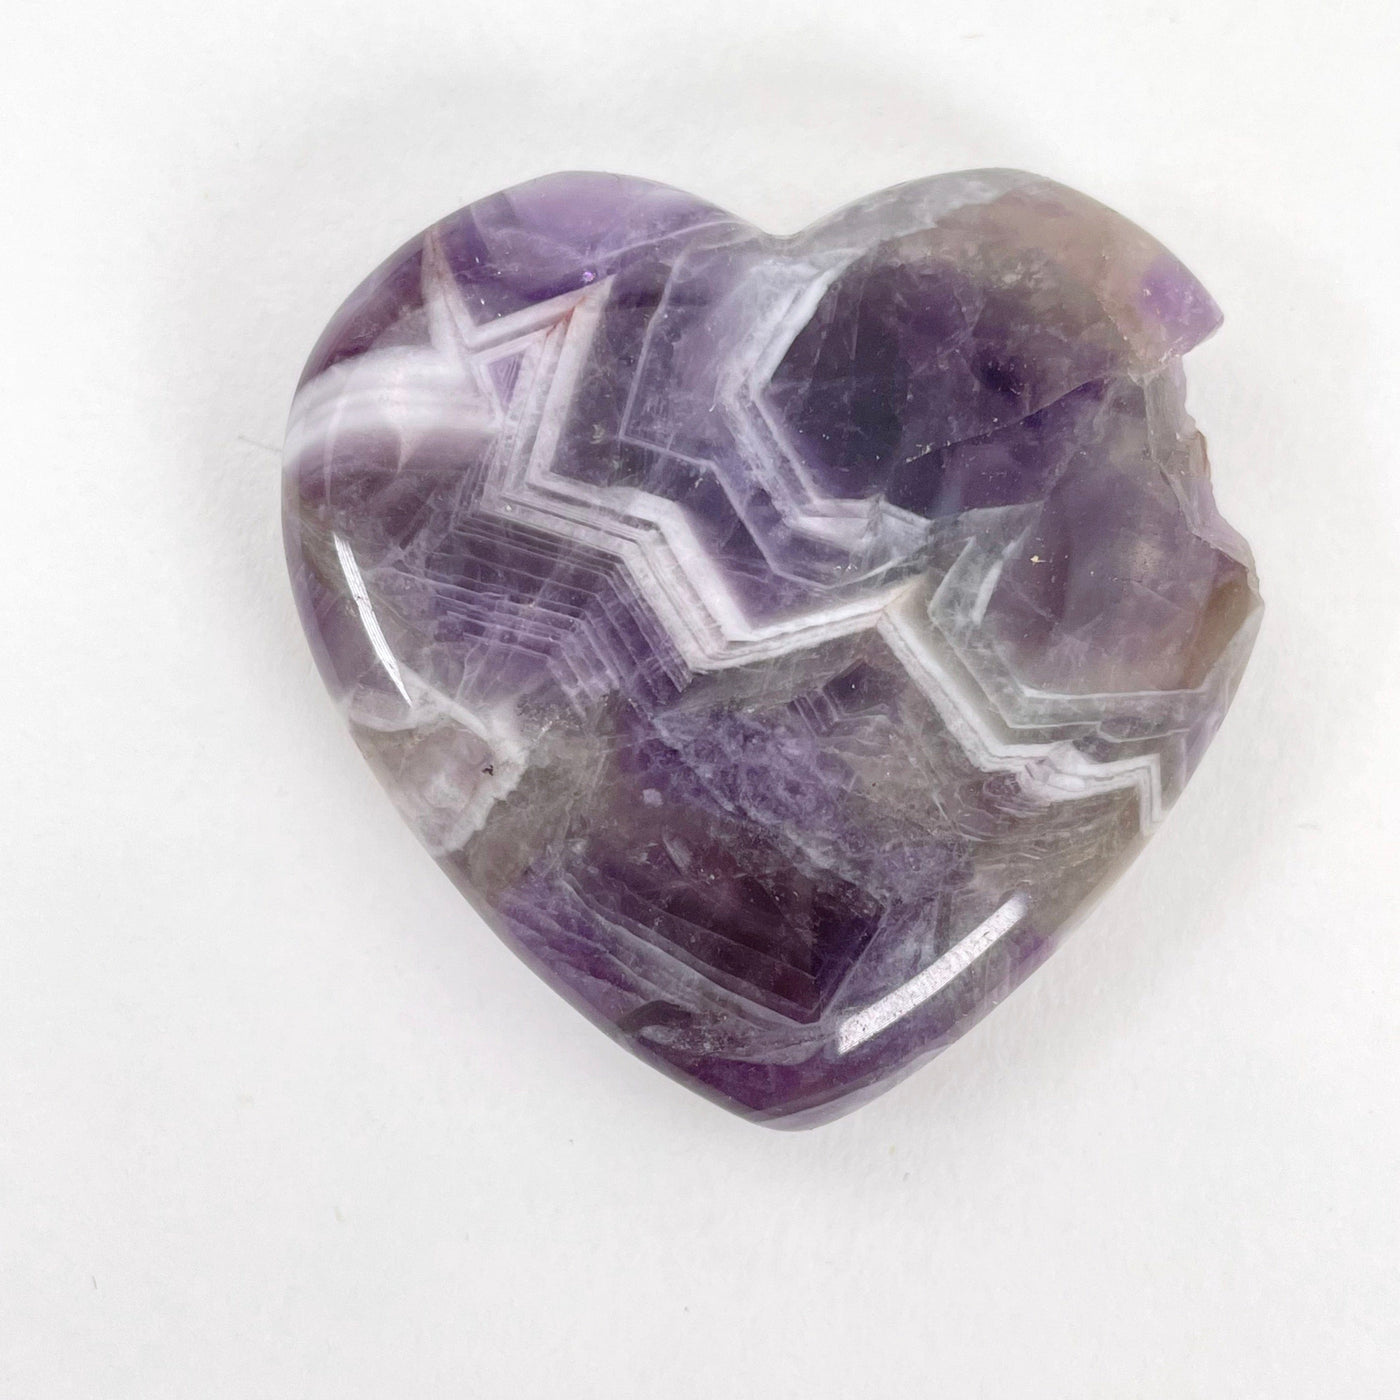 close up of chipped amethyst polished heart for possible damages